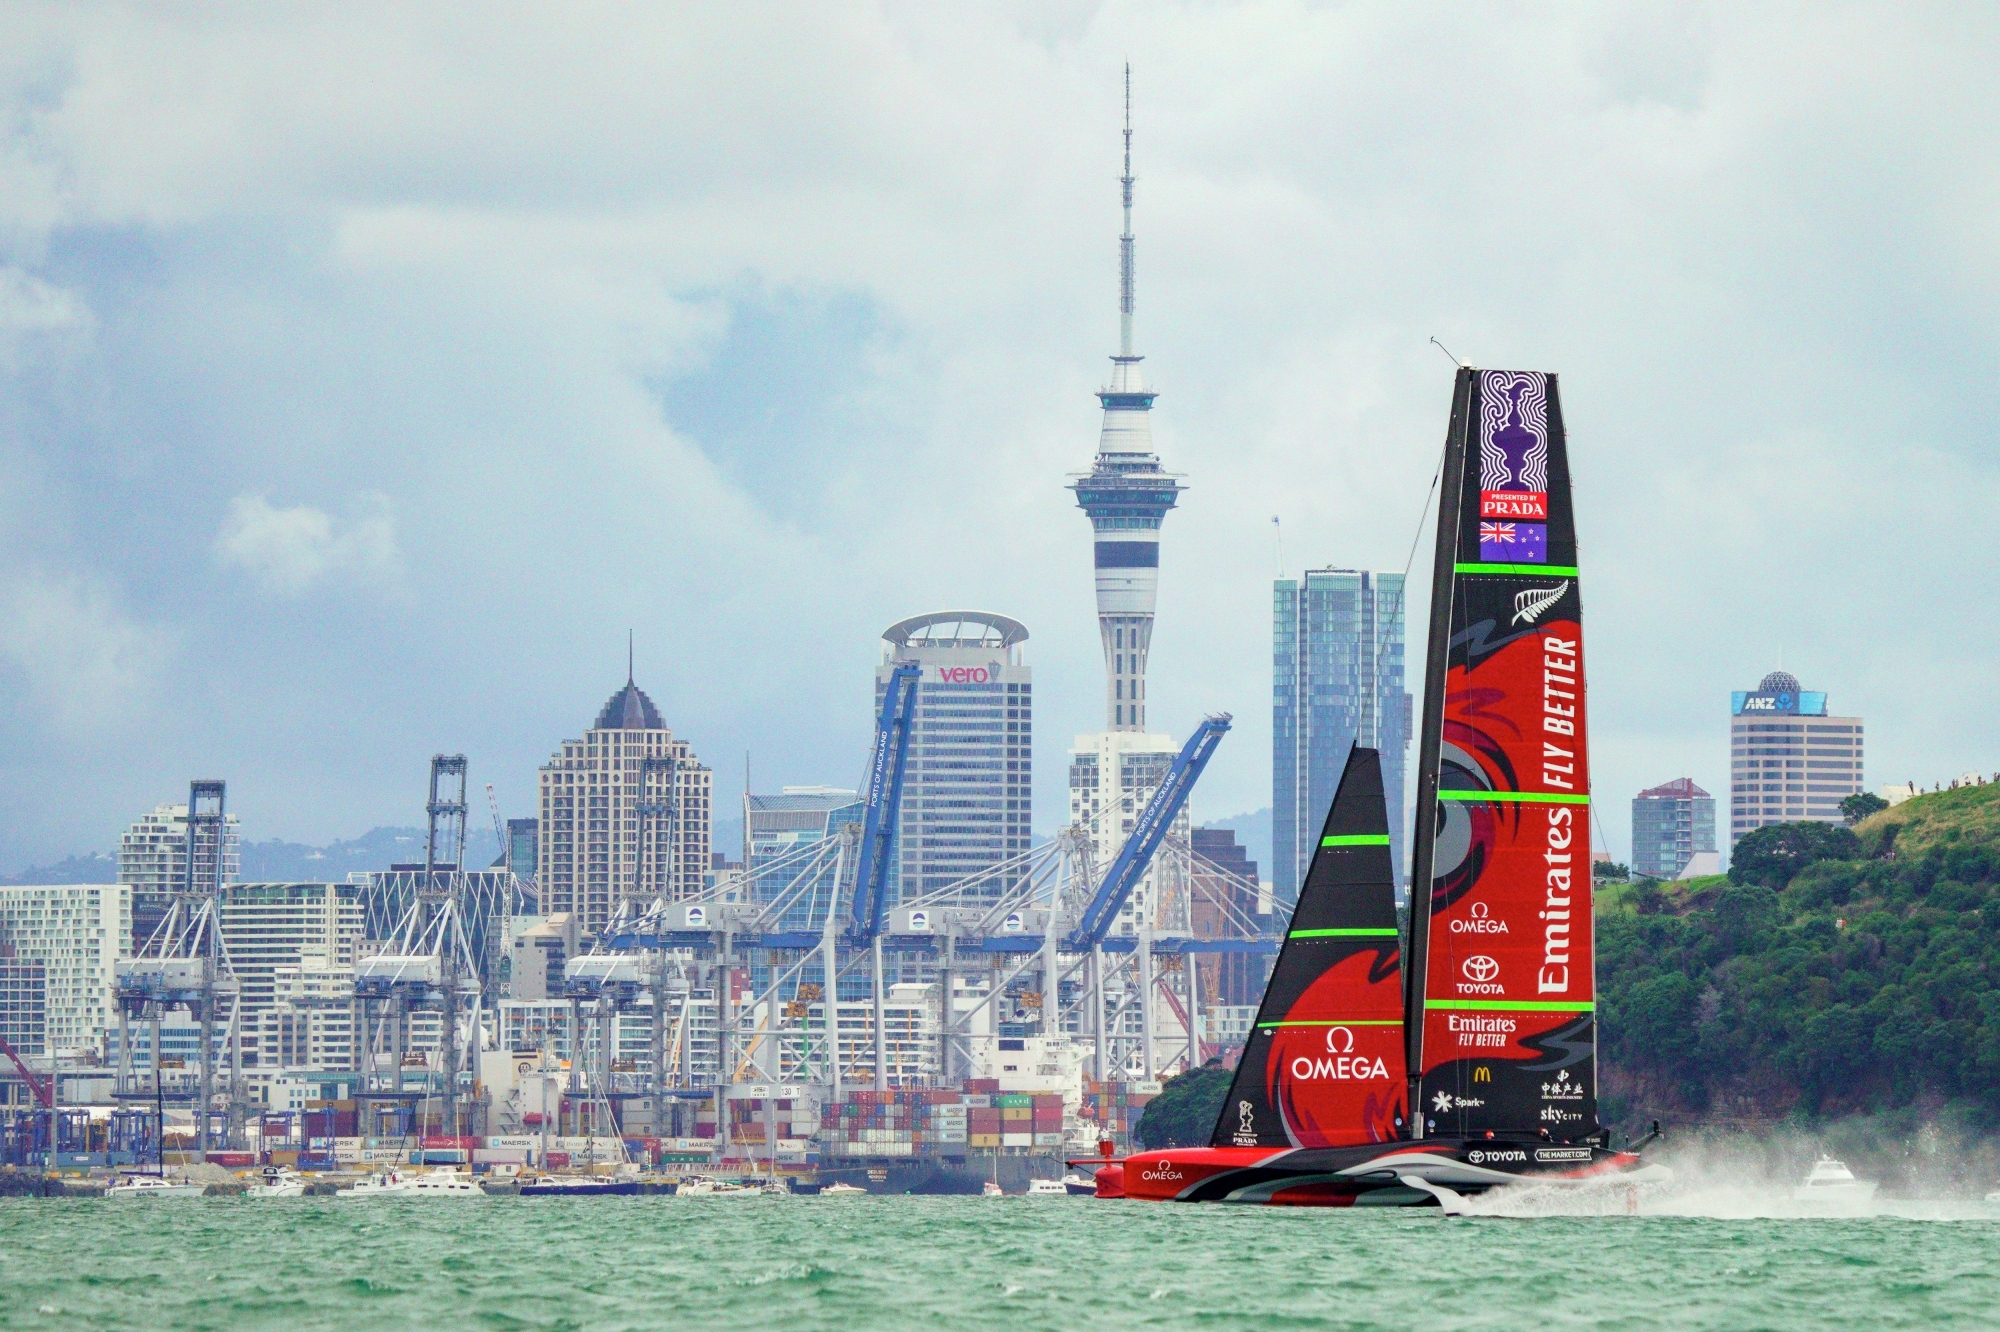  America's Cup  Auckland NZL  Day 6  Another victory for Team New Zealand